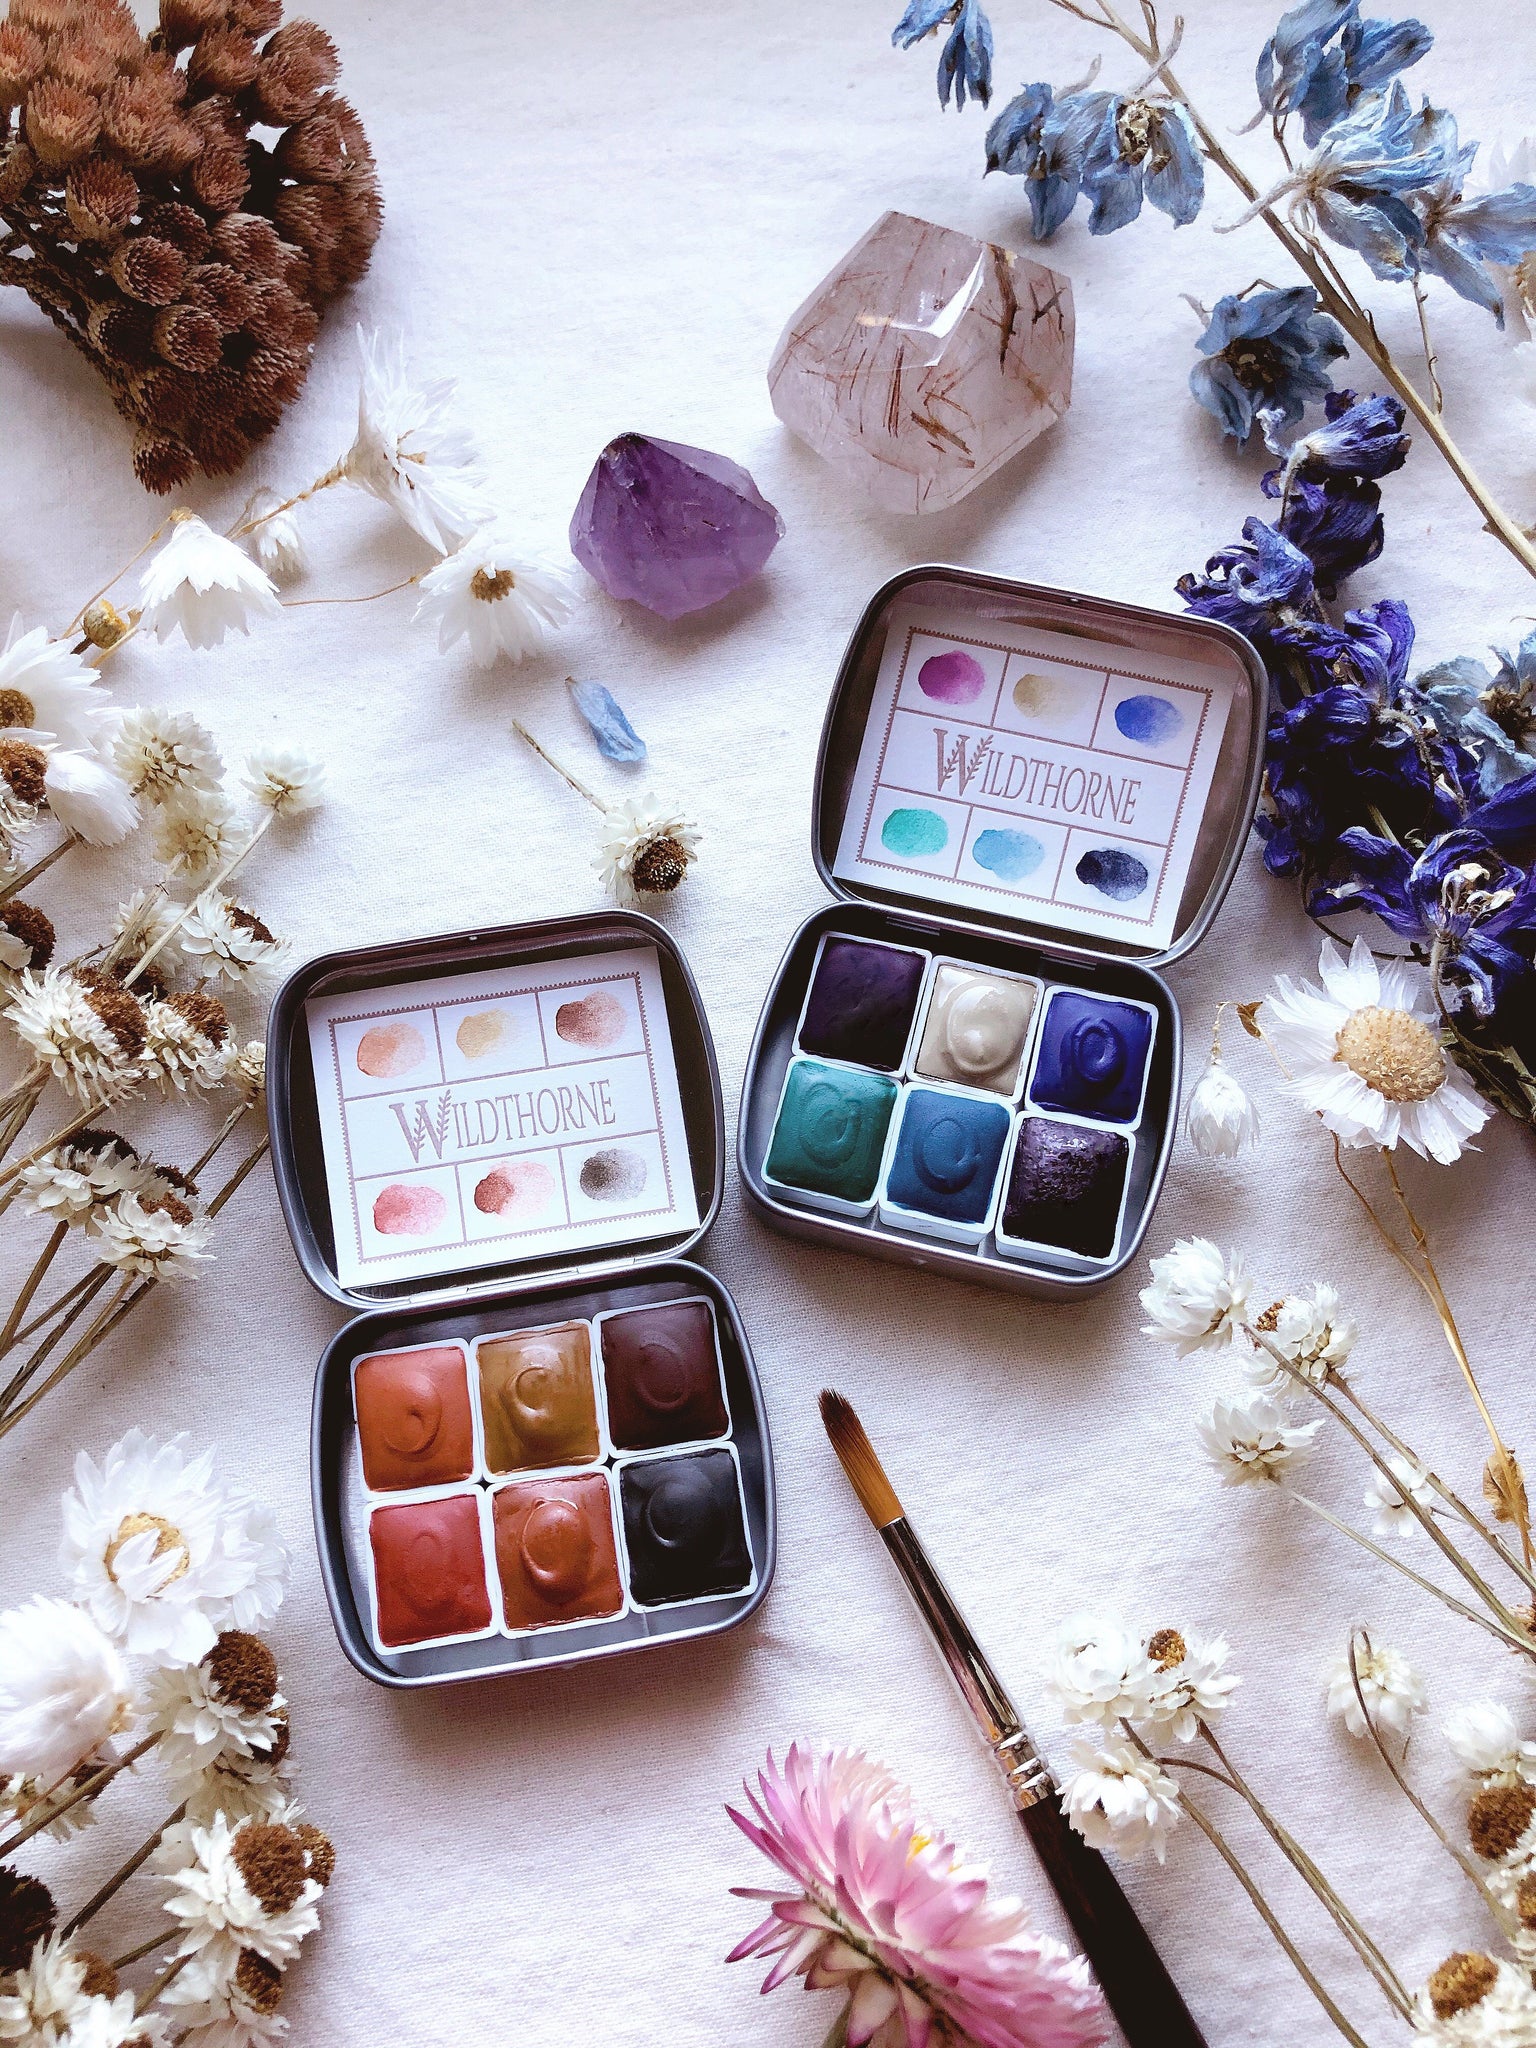 Desert Medicine - “Being You” - Limited edition Mineral watercolor palette